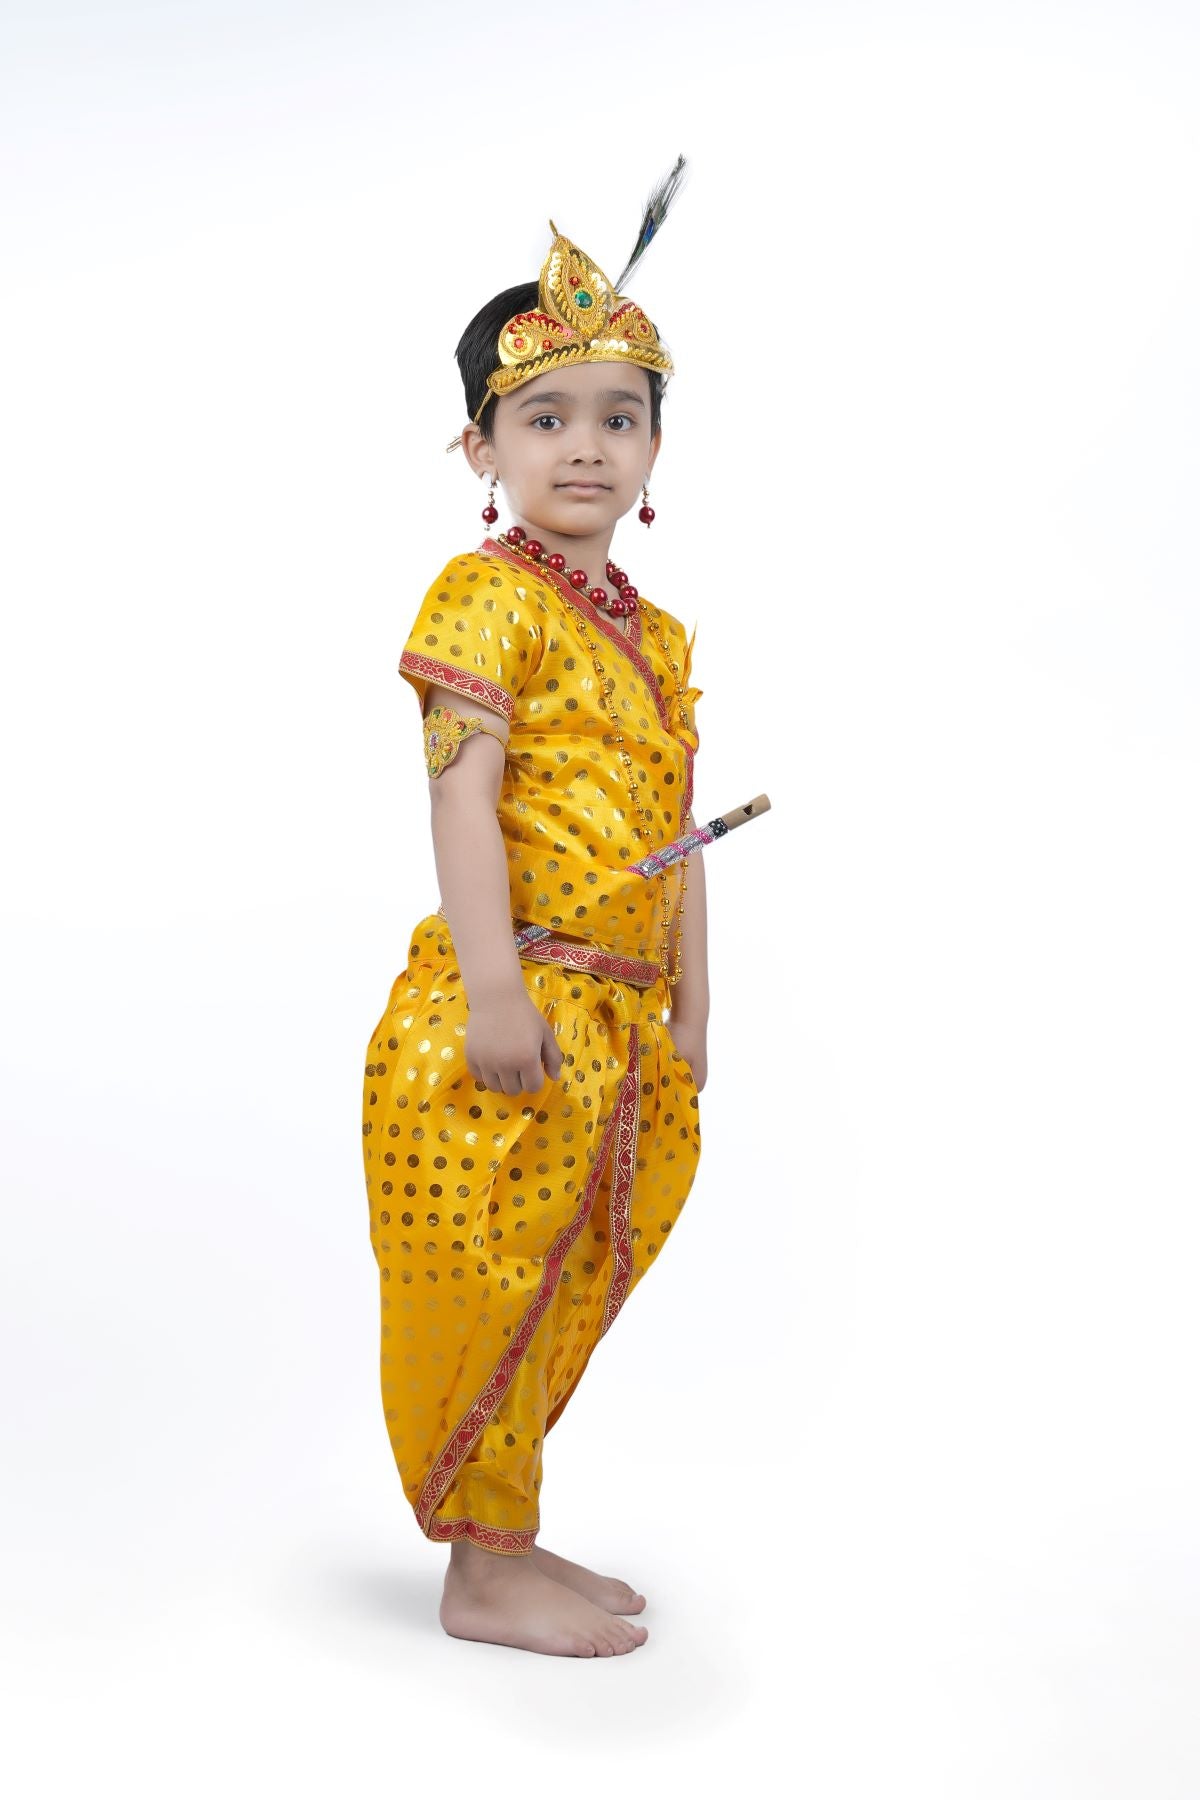 Buy ITSMYCOSTUME Rose Flower Fancy Dress Costume 2-3 Years Online at Low  Prices in India - Amazon.in